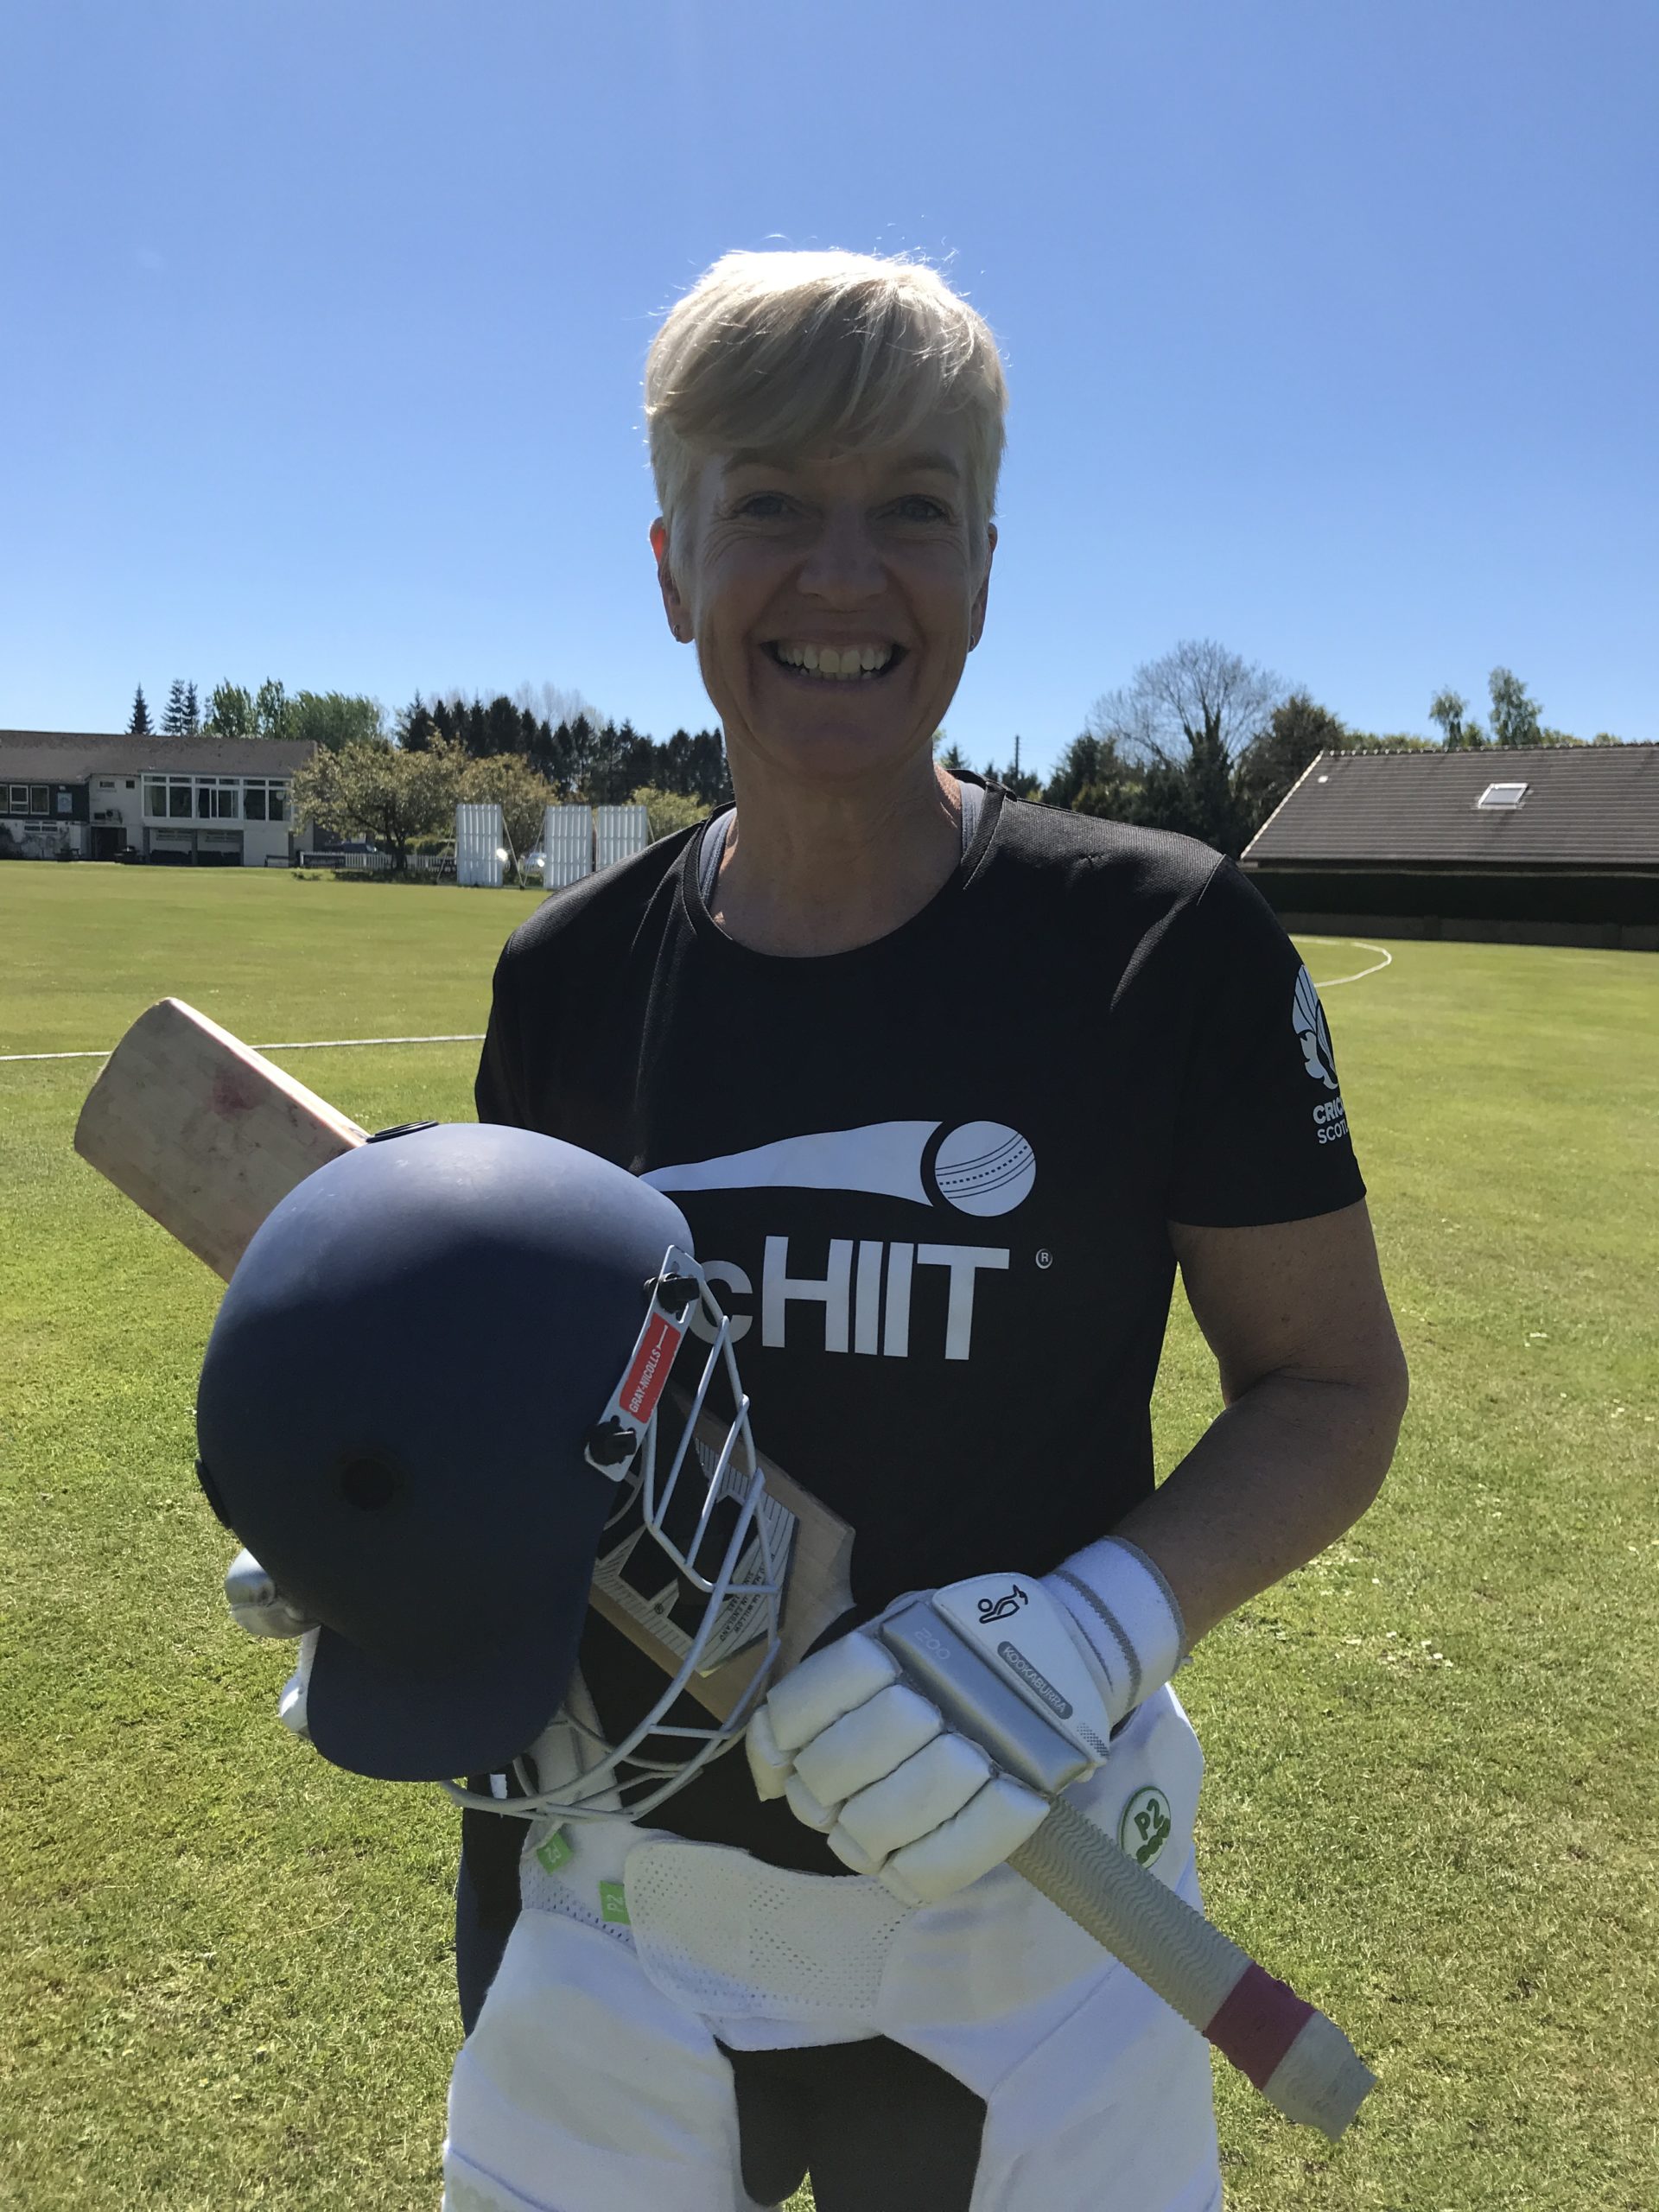 Sue Strachan enters two-year term as first female President of Cricket Scotland